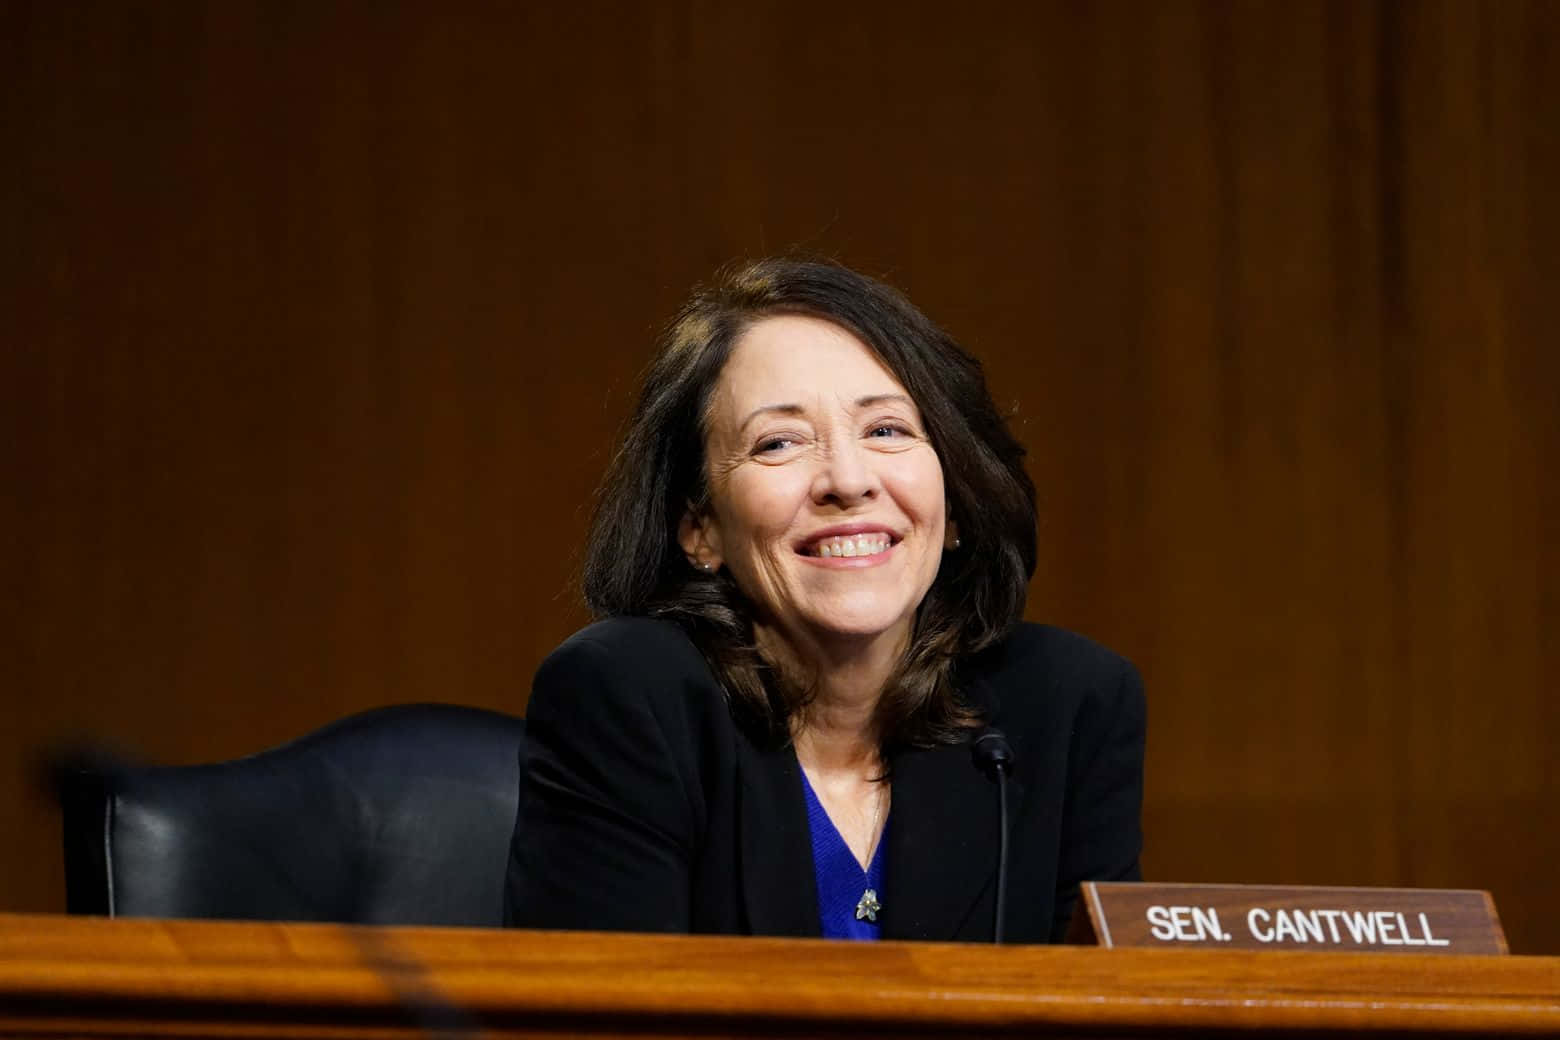 Maria Cantwell Looks Happy Wallpaper